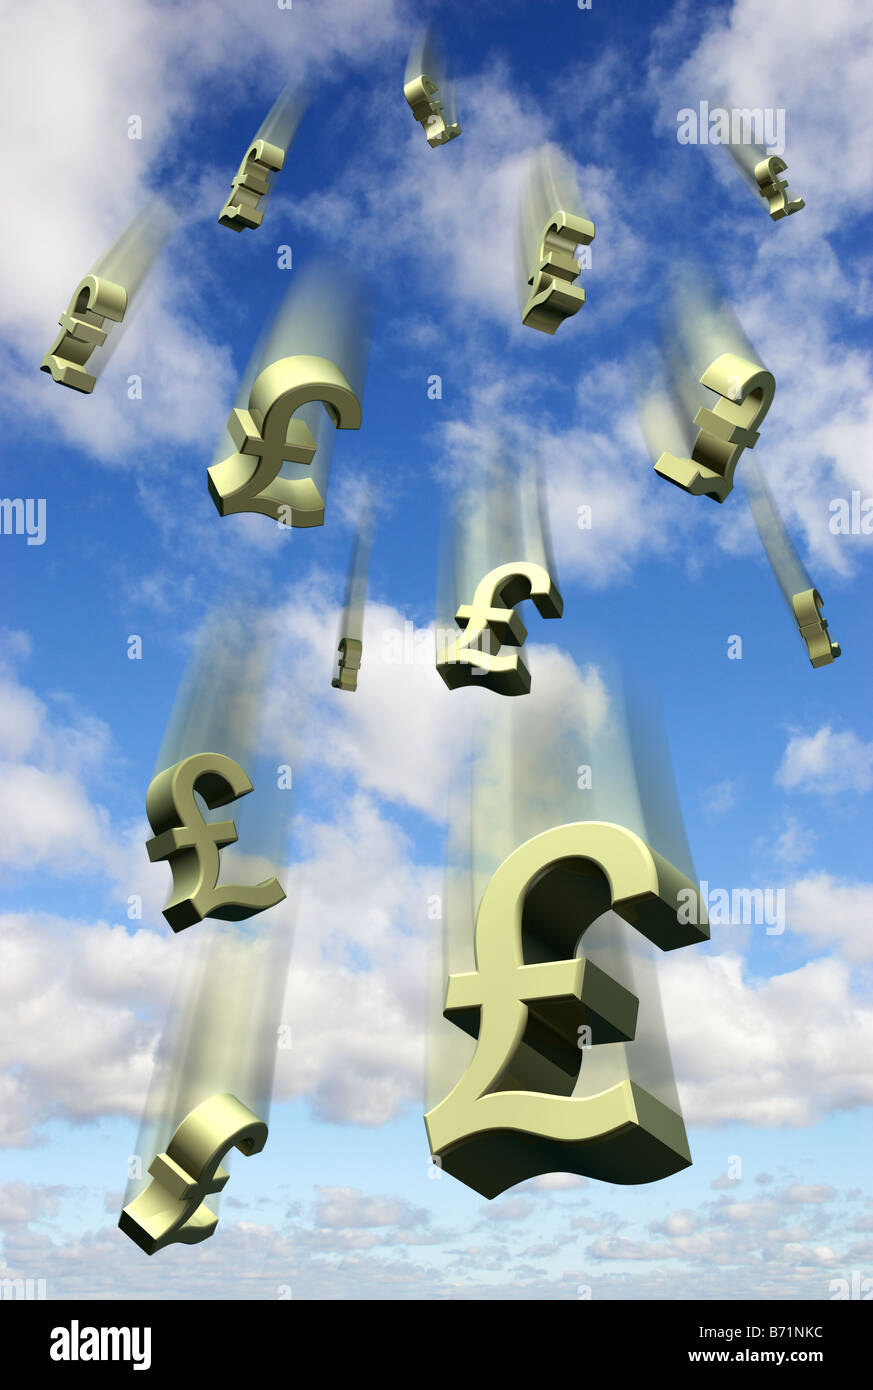 Falling money GBP currency pound sterling symbols against a blue sky - digital composite Stock Photo